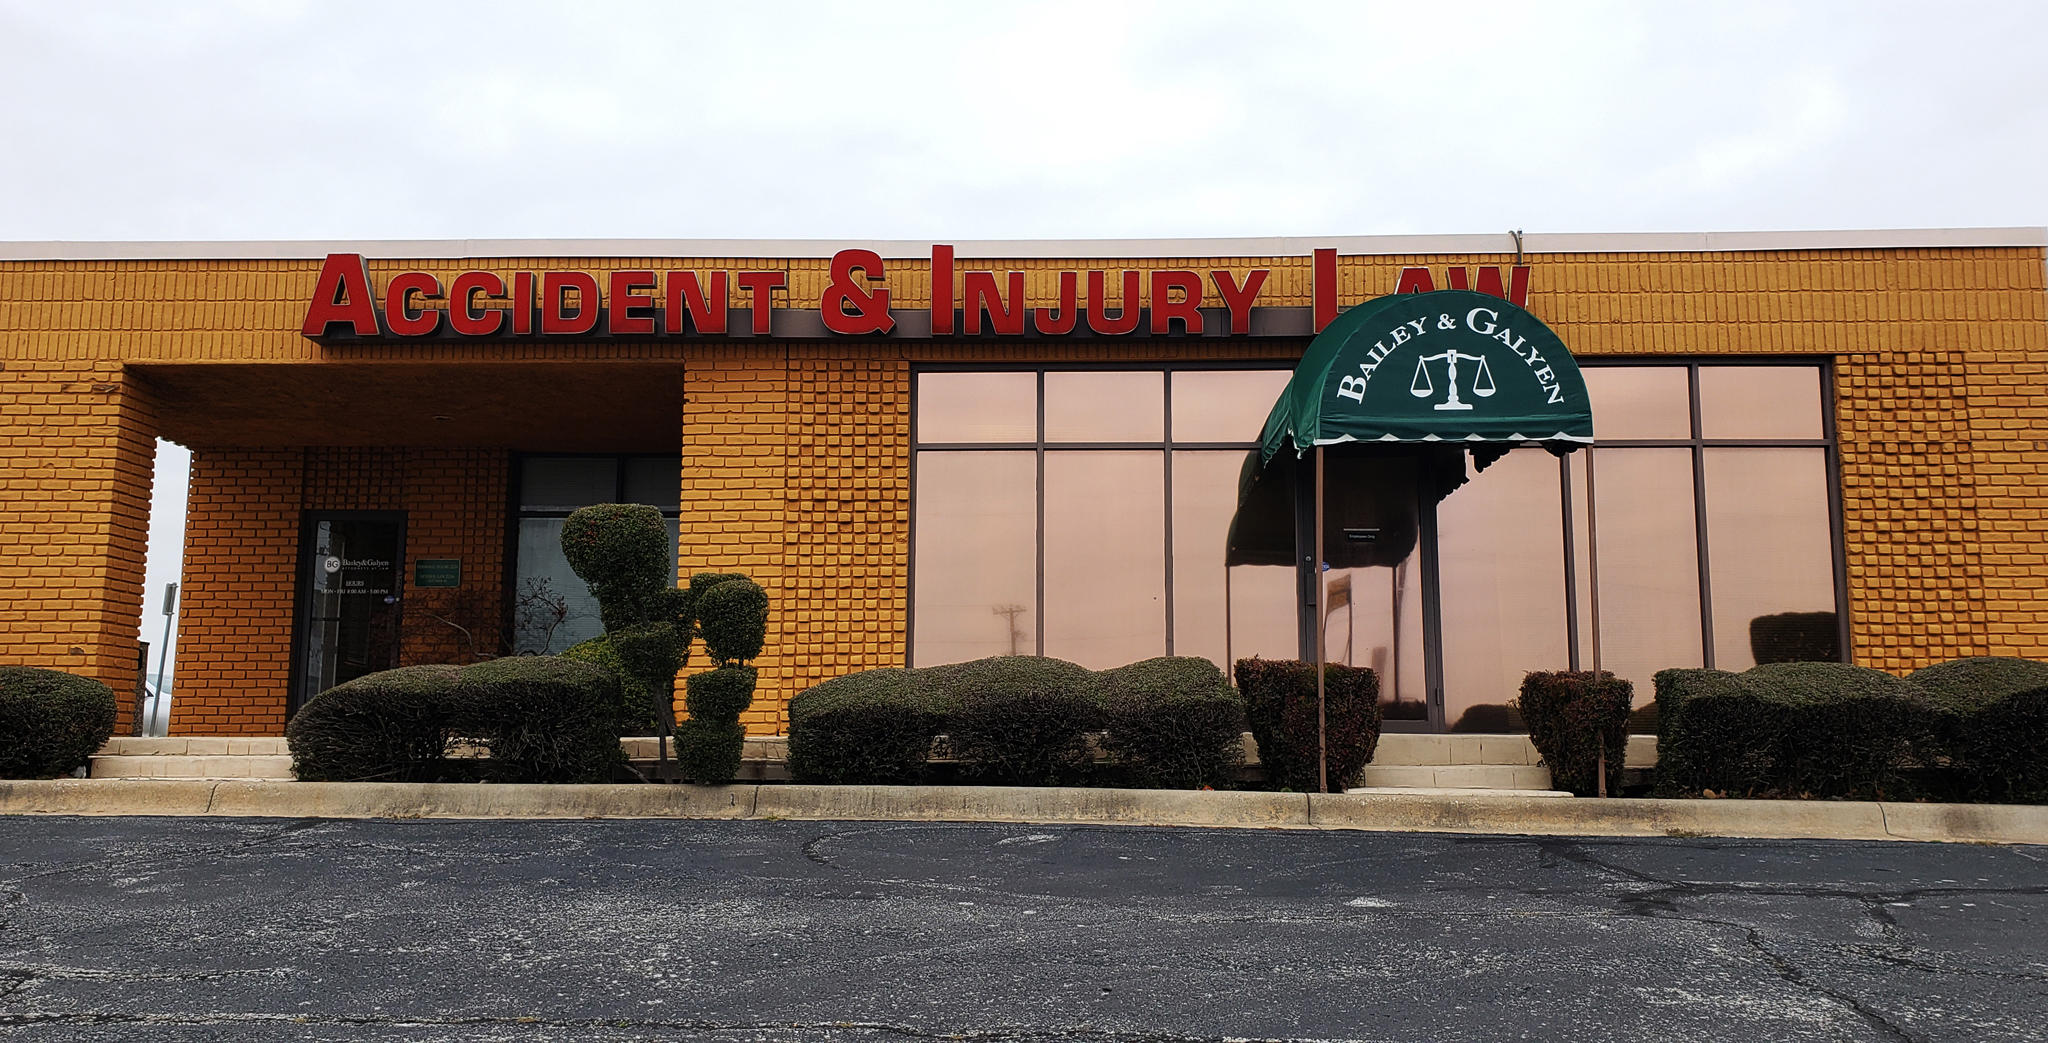 Bailey & Galyen Attorneys at Law Photo